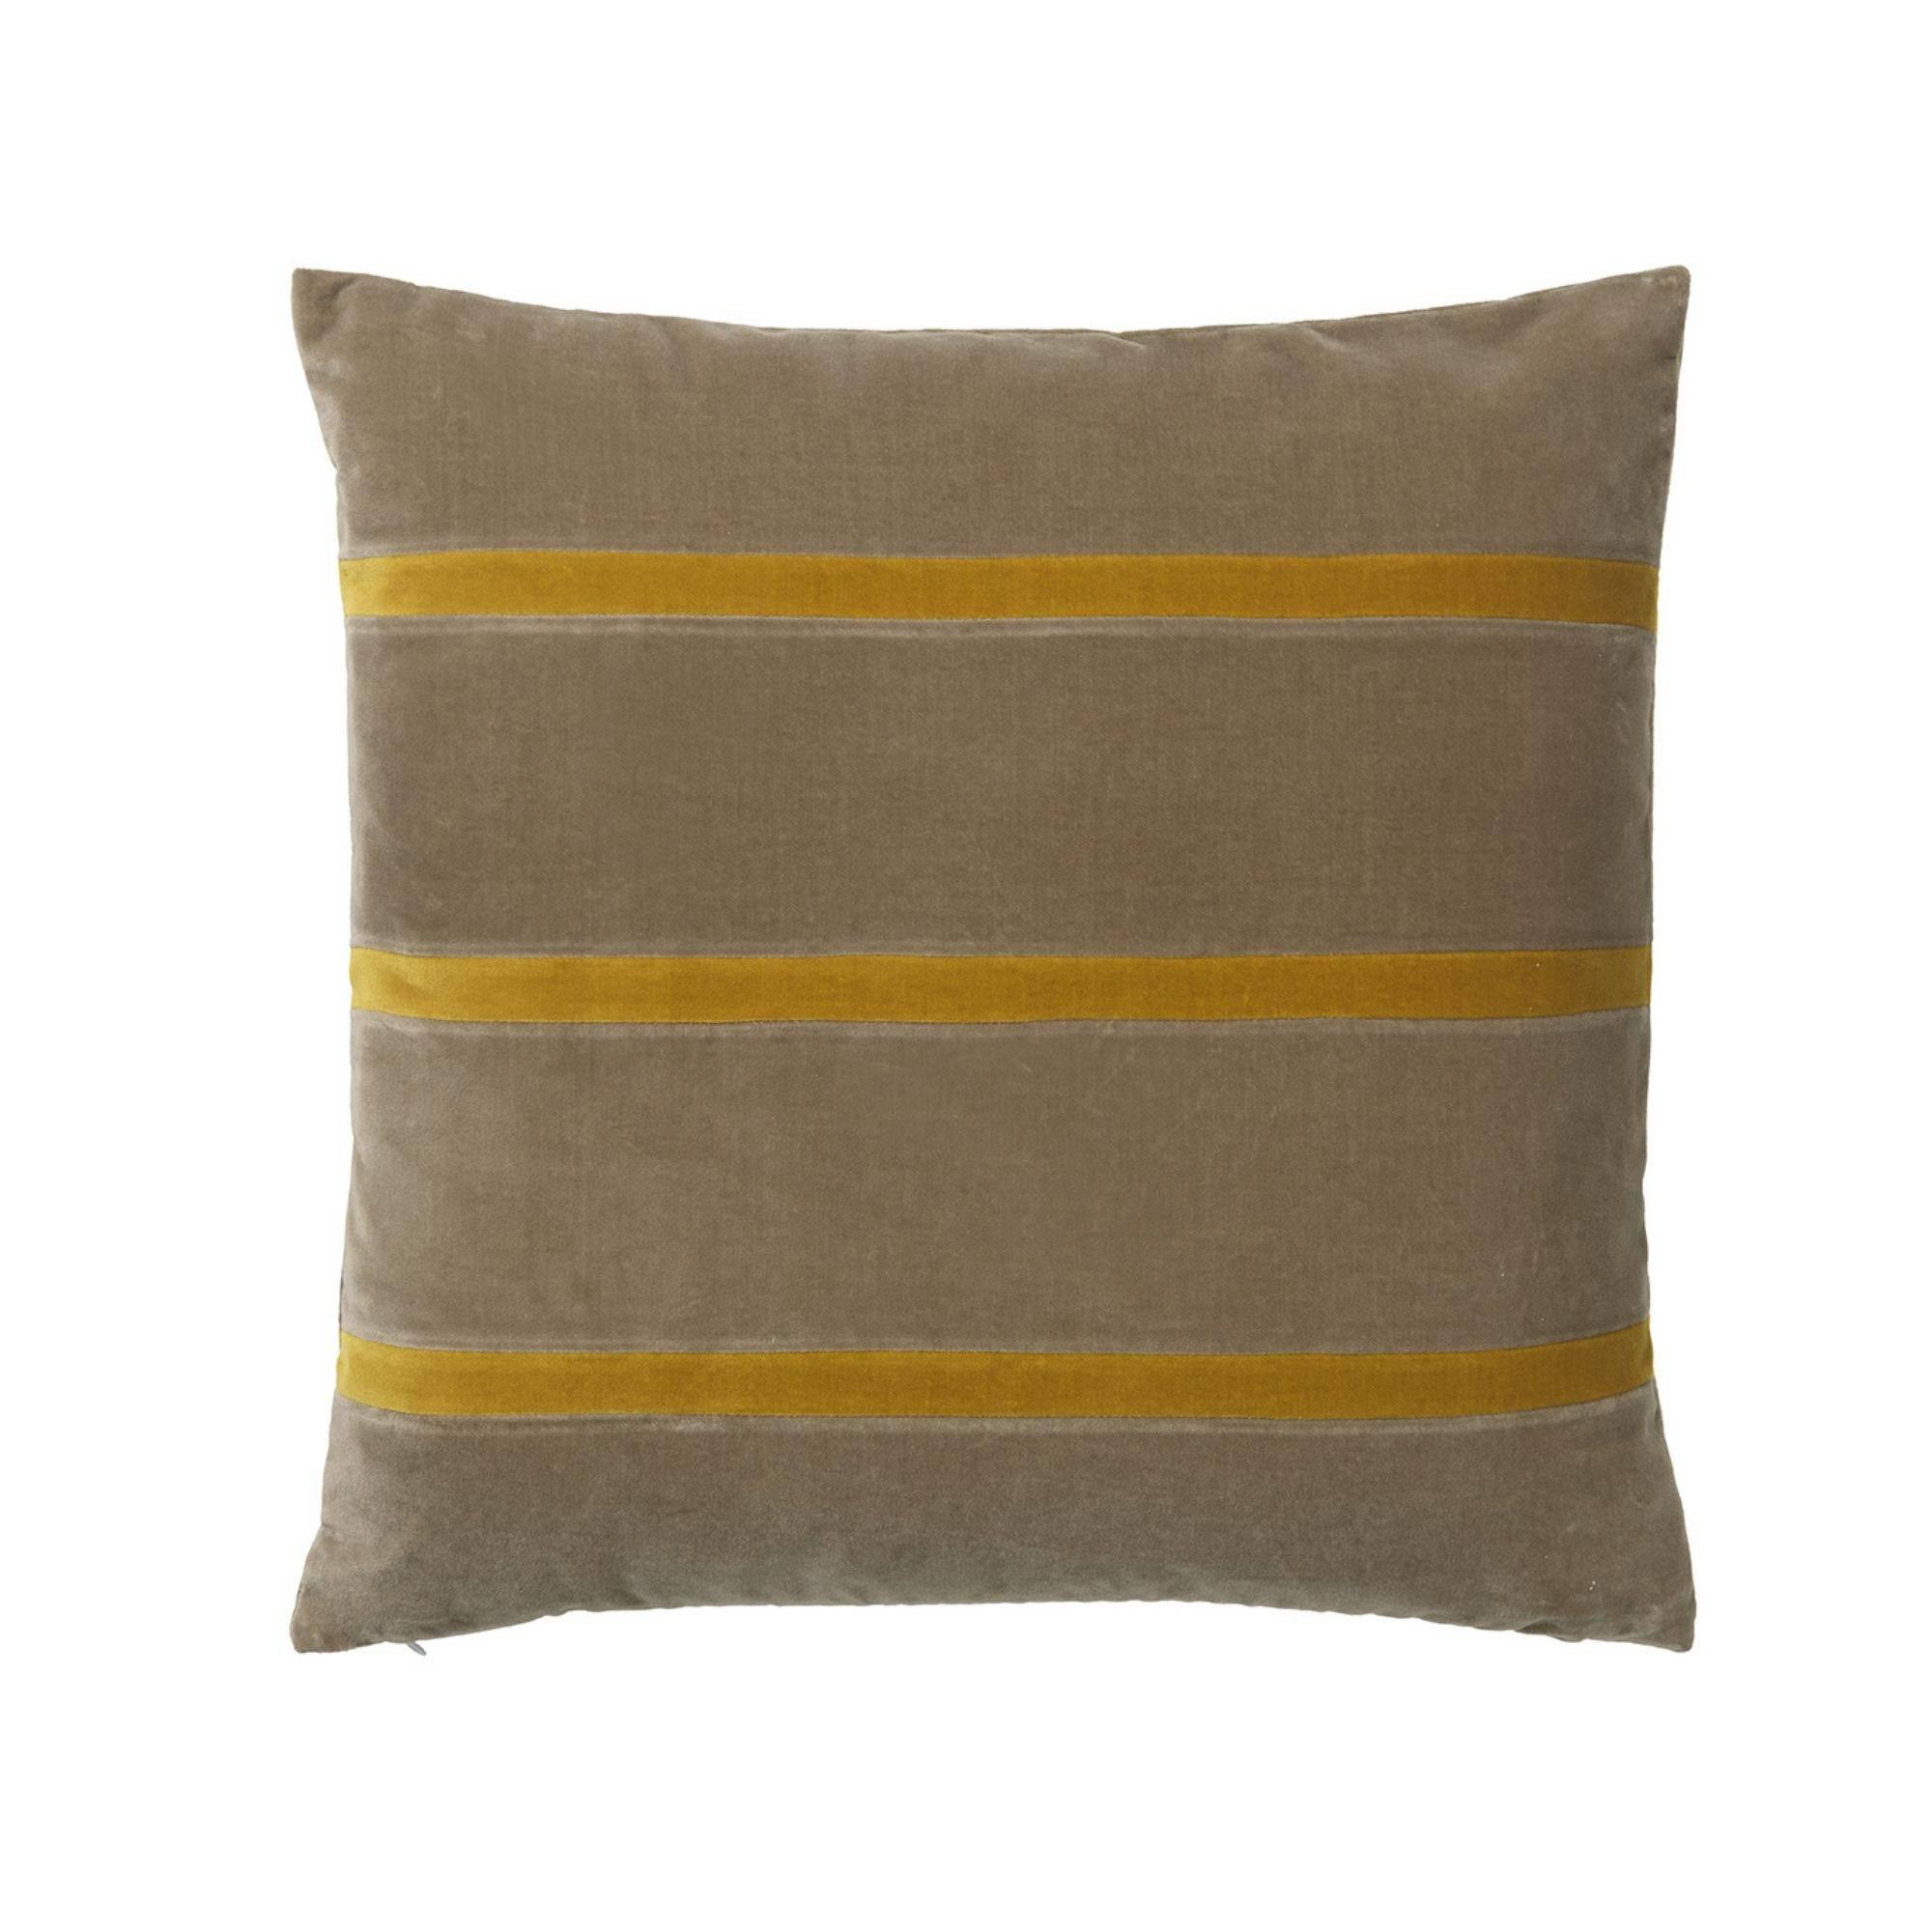 Gemma Cushion - Taupe & Golden Olive - THAT COOL LIVING